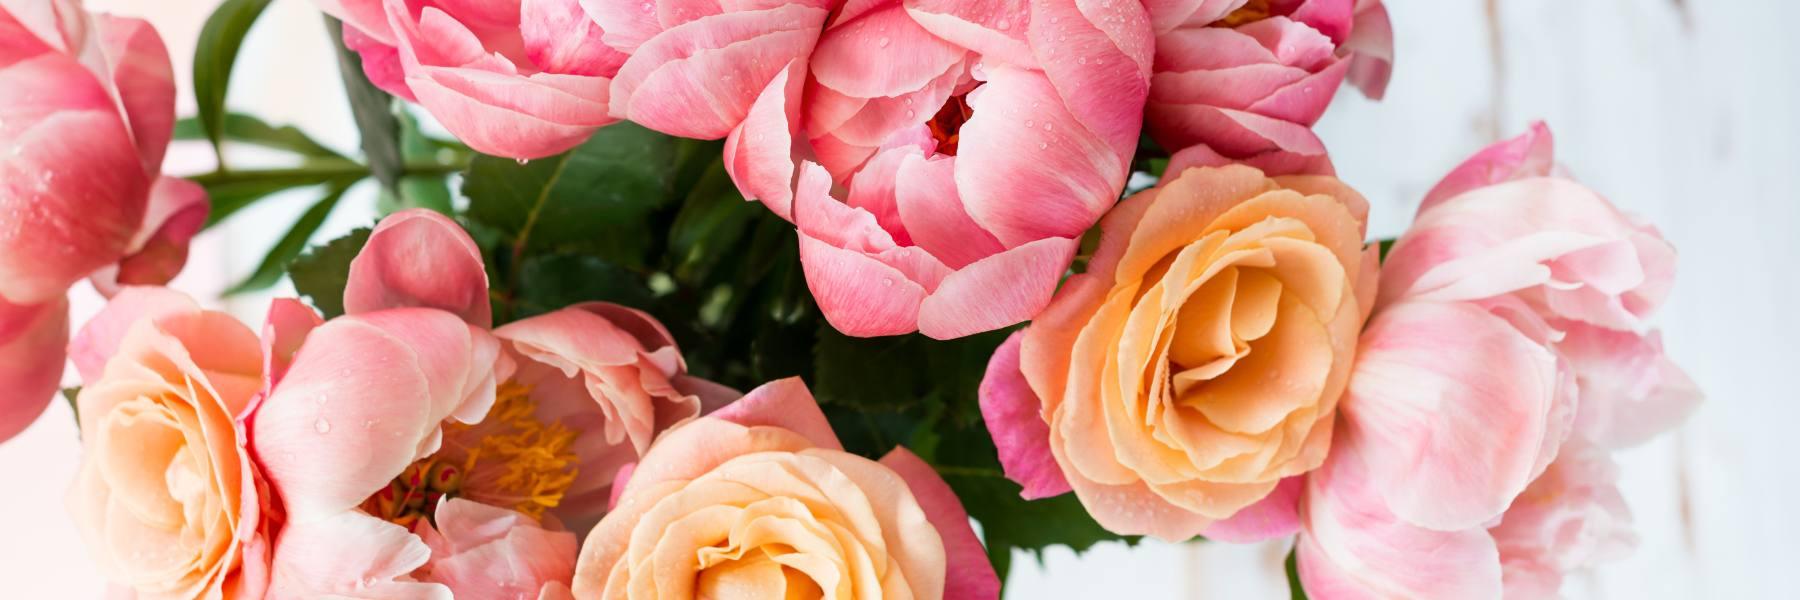 The Ultimate Guide to Rose Essential Oil - A Beauty Box in a Flower